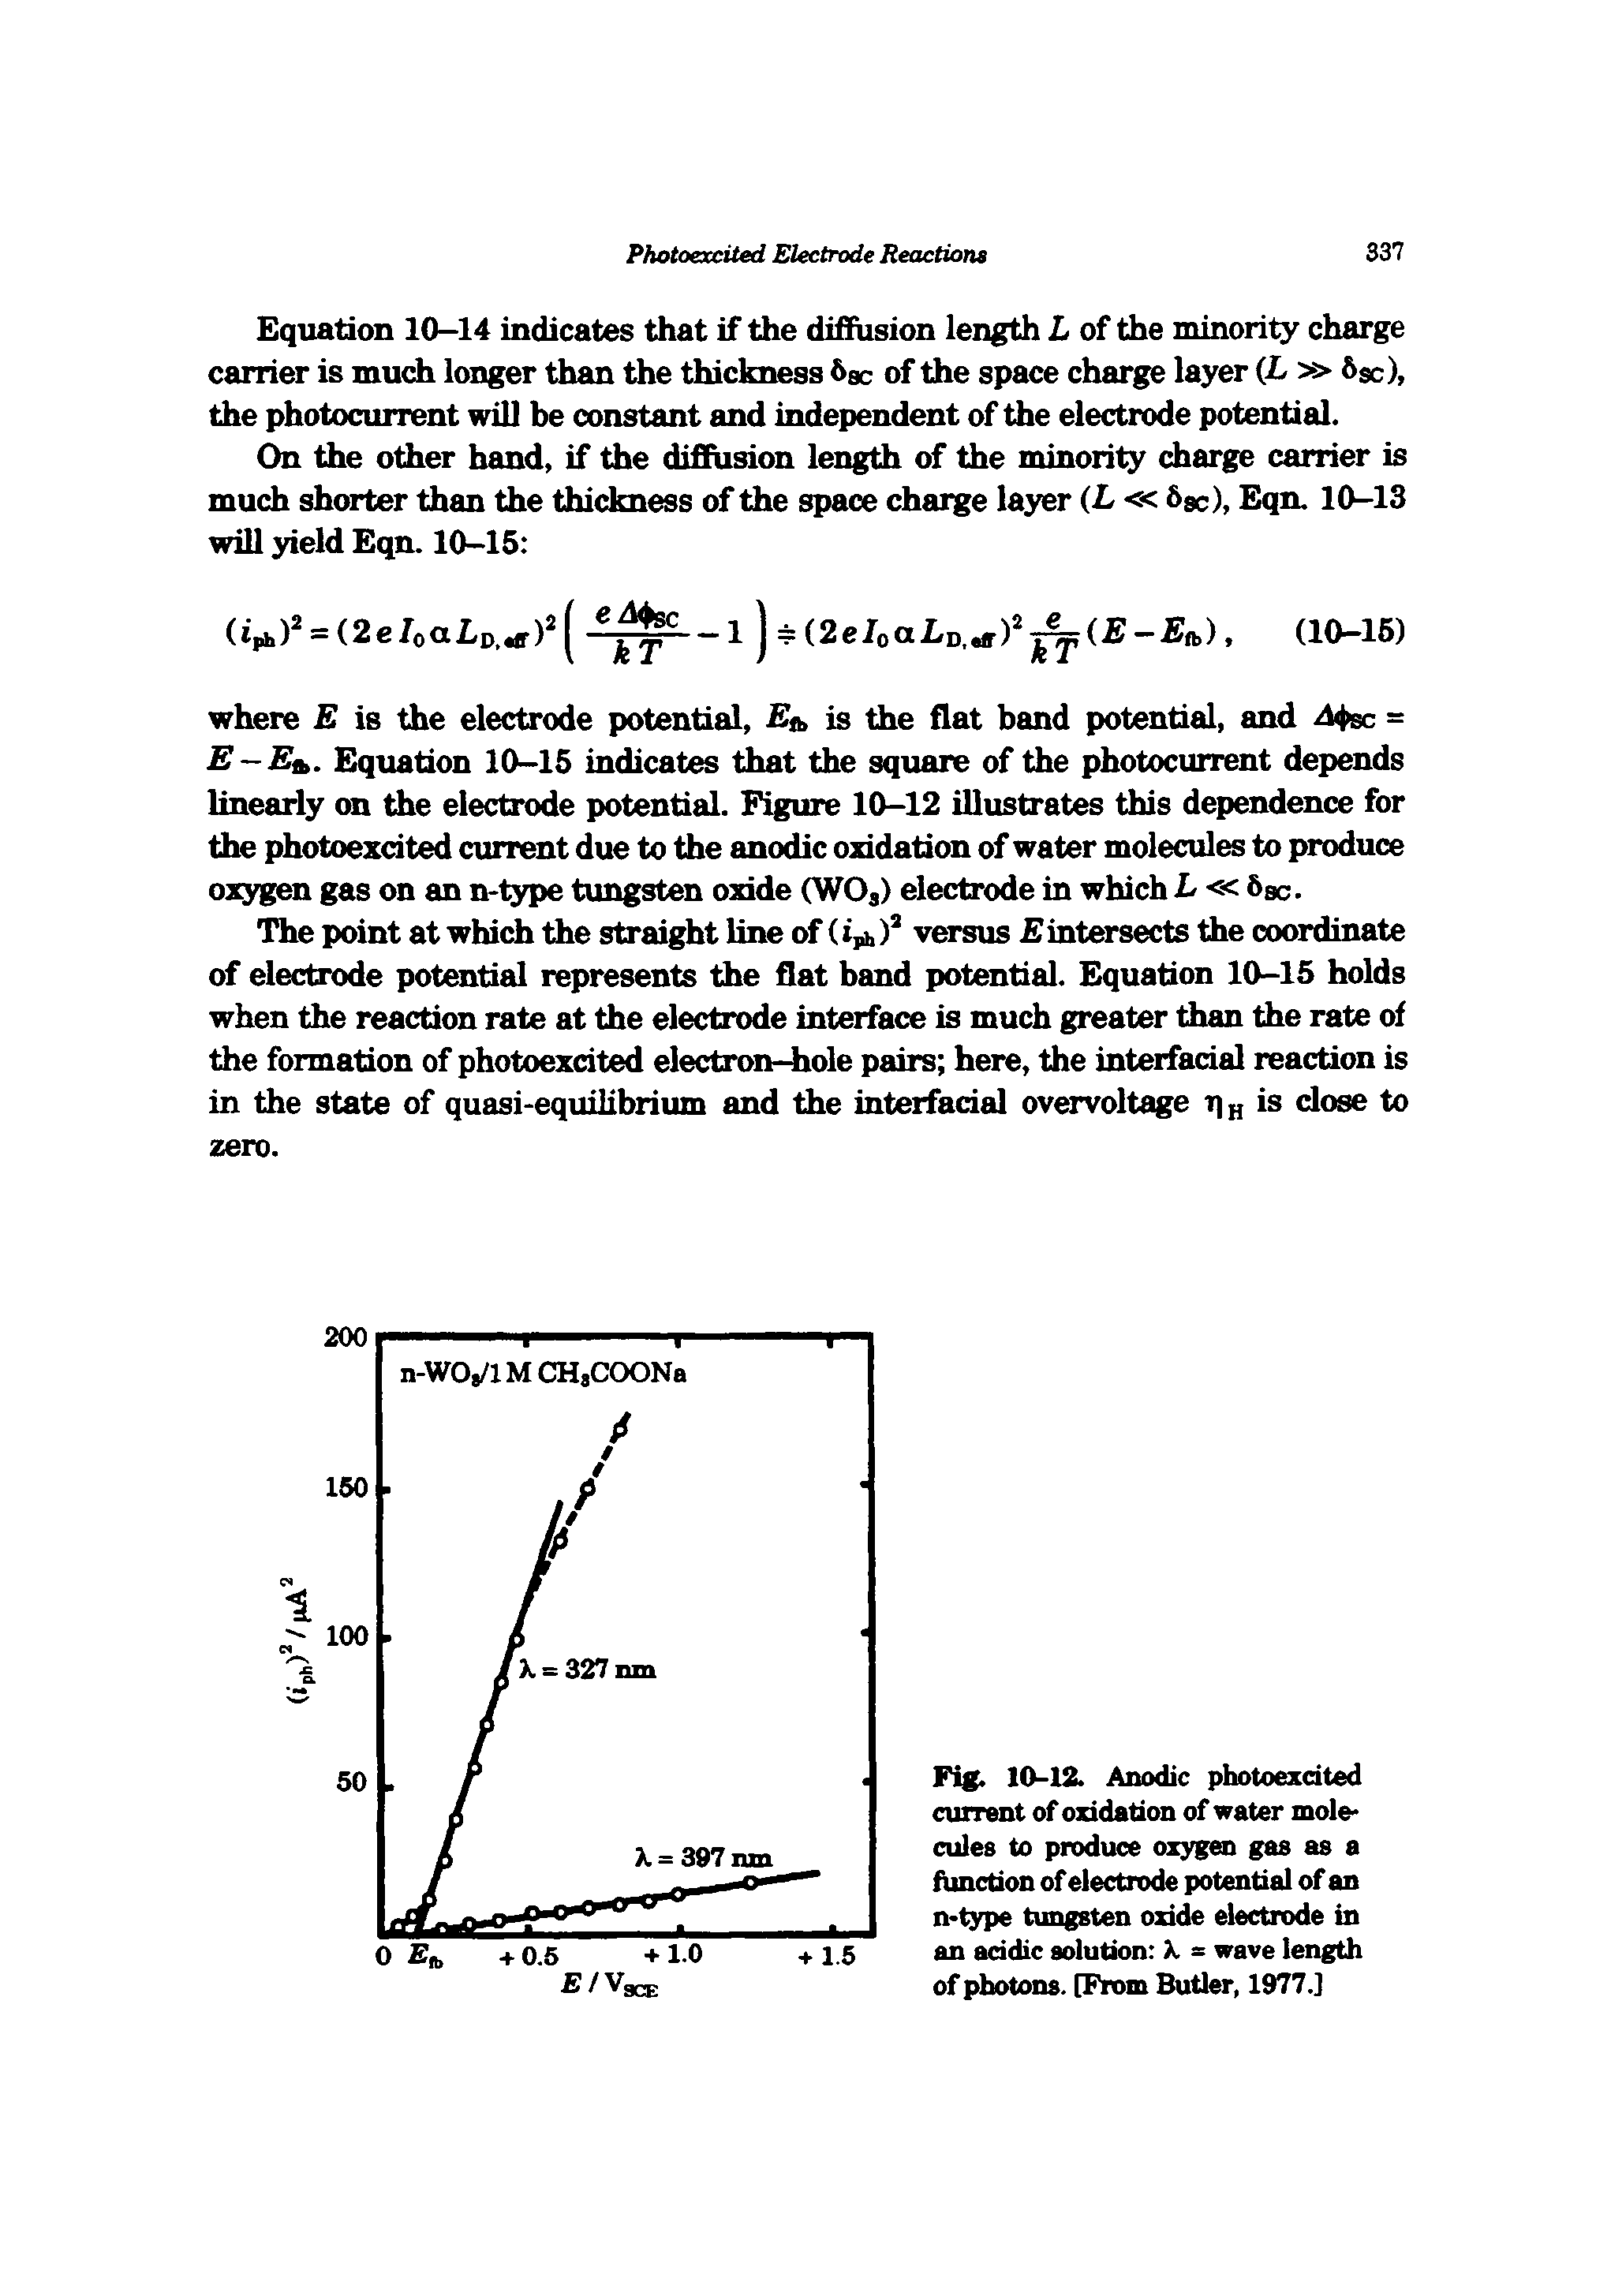 Fig. 10-12. Anodic photoexcited current of oxidation of water mole cules to produce oxygen gas as a function of electrode potential of an n-type tungsten oxide electrode in an acidic solution X. = wave length of photons. [From Butler, 1977.]...